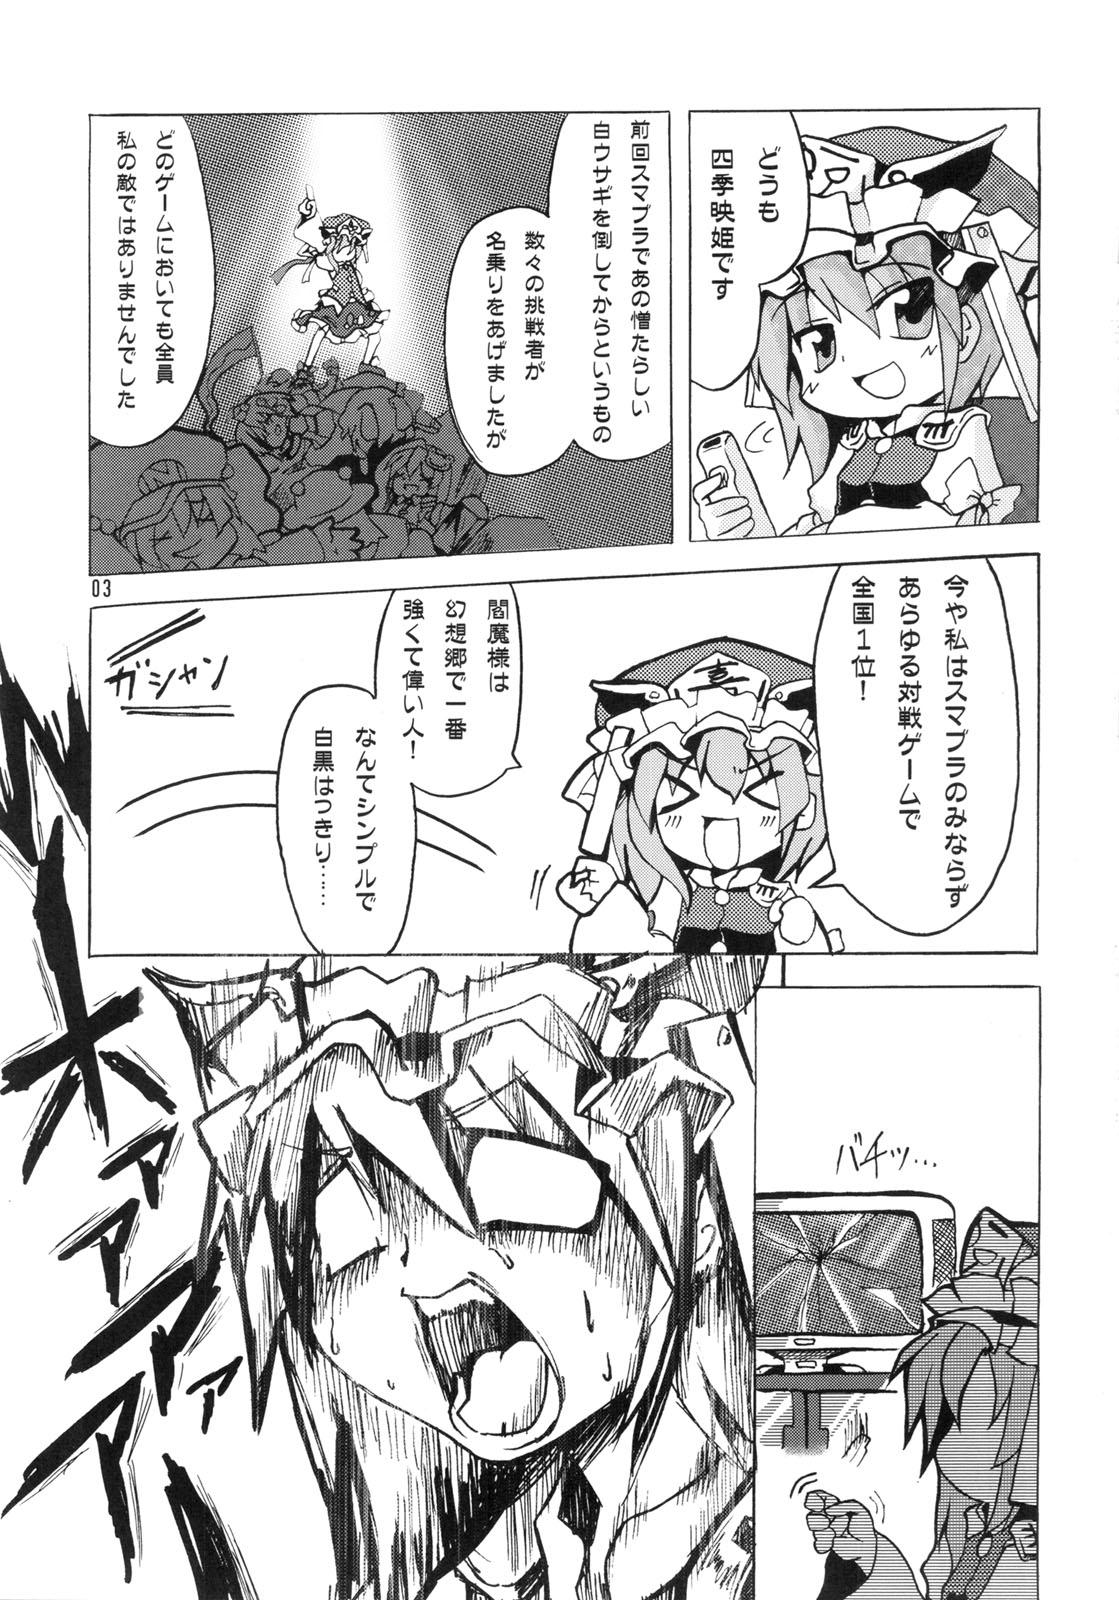 Teenage Porn えーきさまとヴィイ - Touhou project Twistys - Page 5